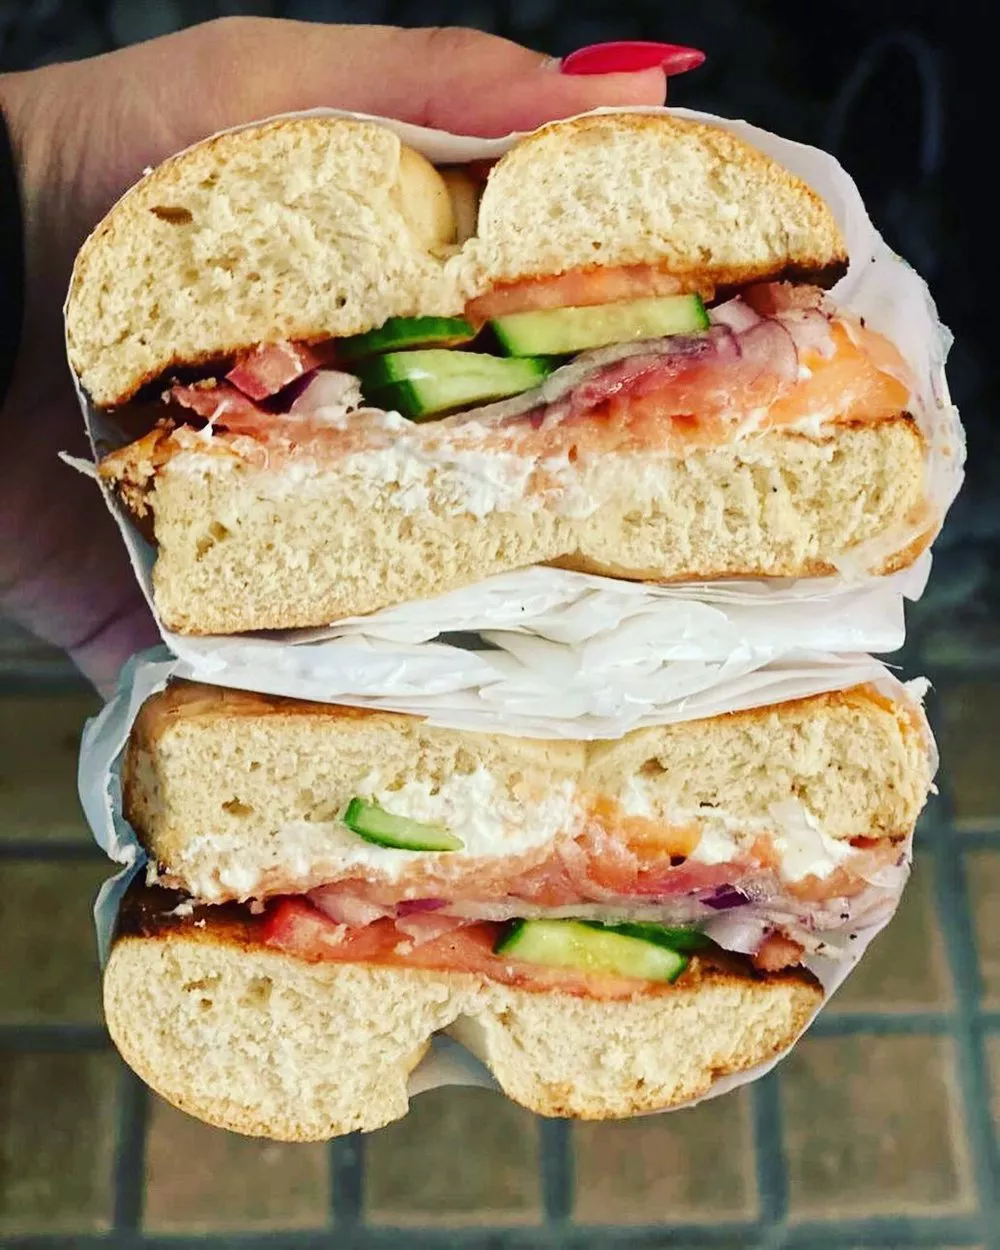 The Beverly Hills Bagel Company